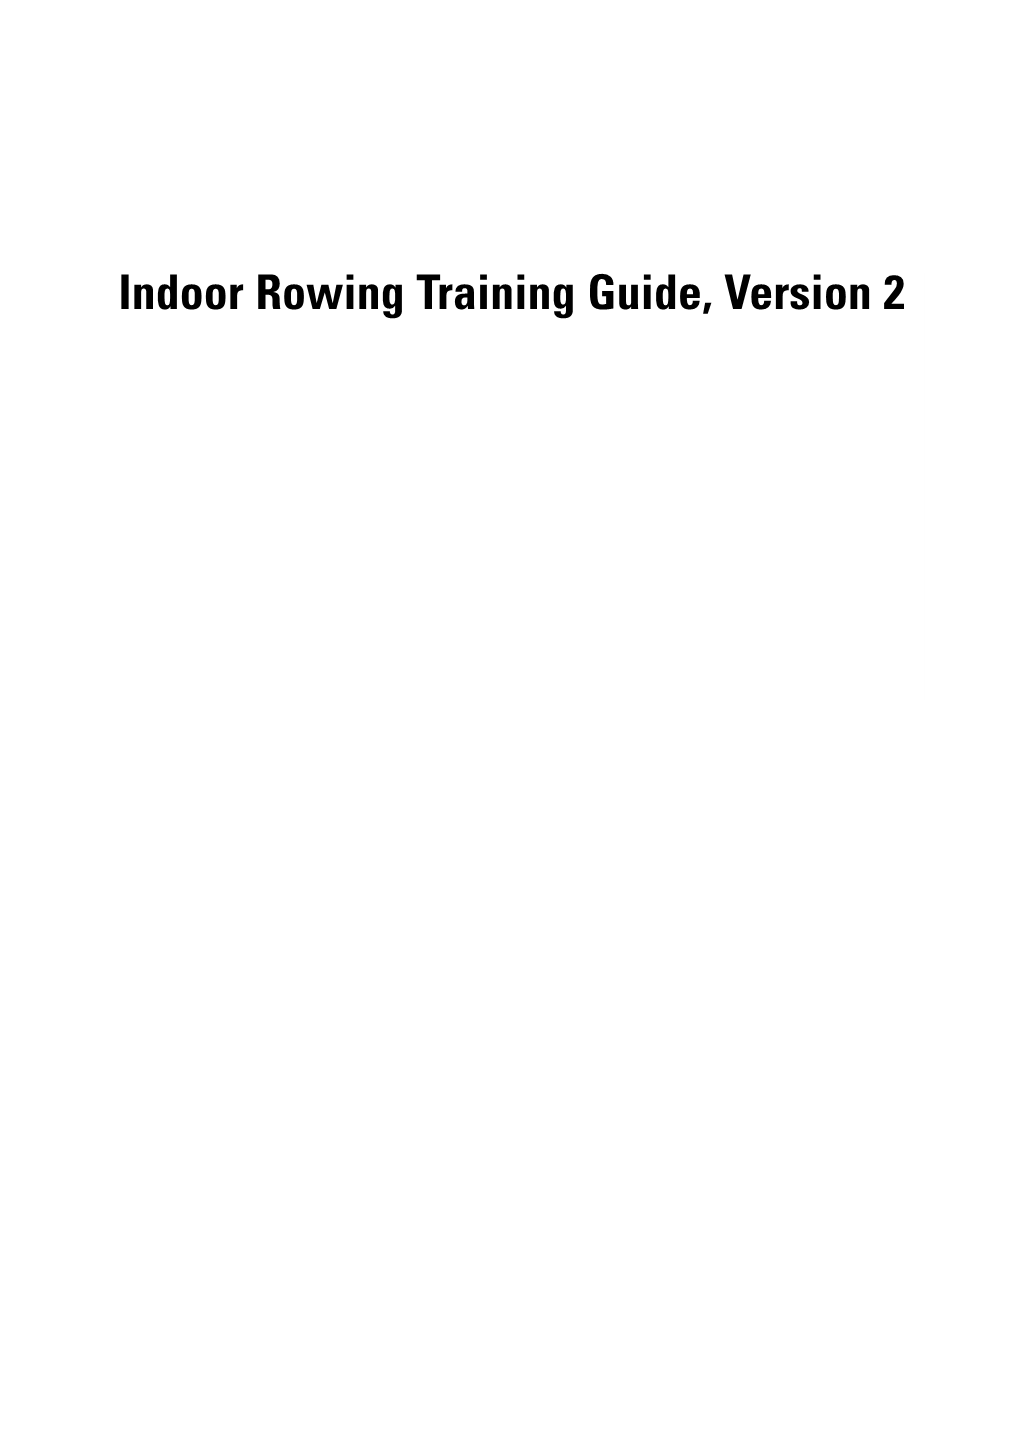 Indoor Rowing Training Guide, Version 2 the Indoor Rowing Training Guide, Version 2, Was Written by Terry O’Neill and Alex Skelton